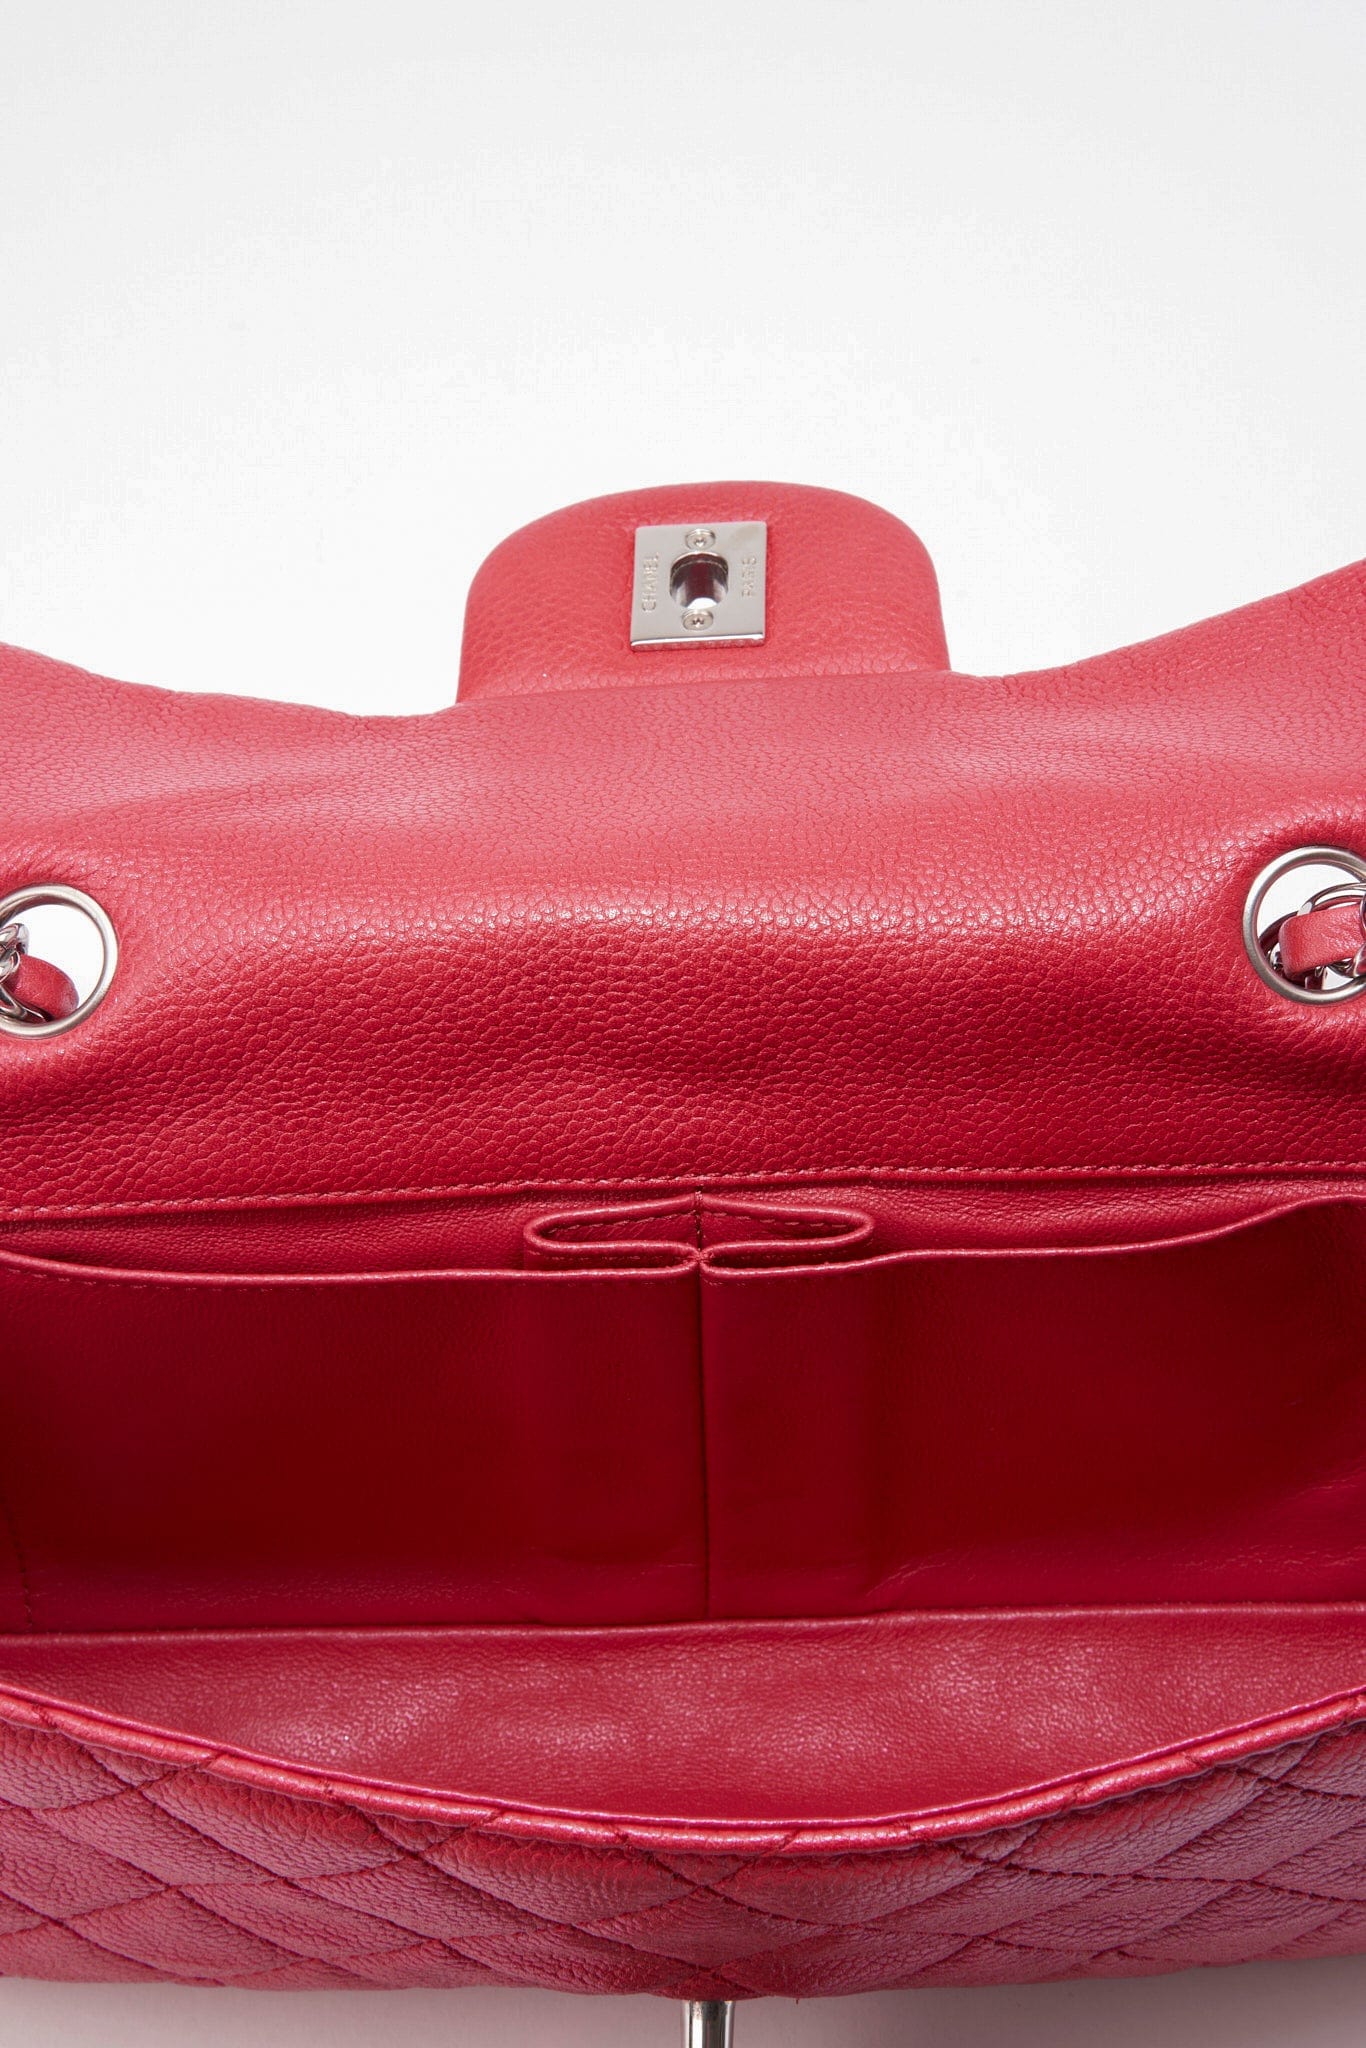 Chanel Red Leather Single Flap